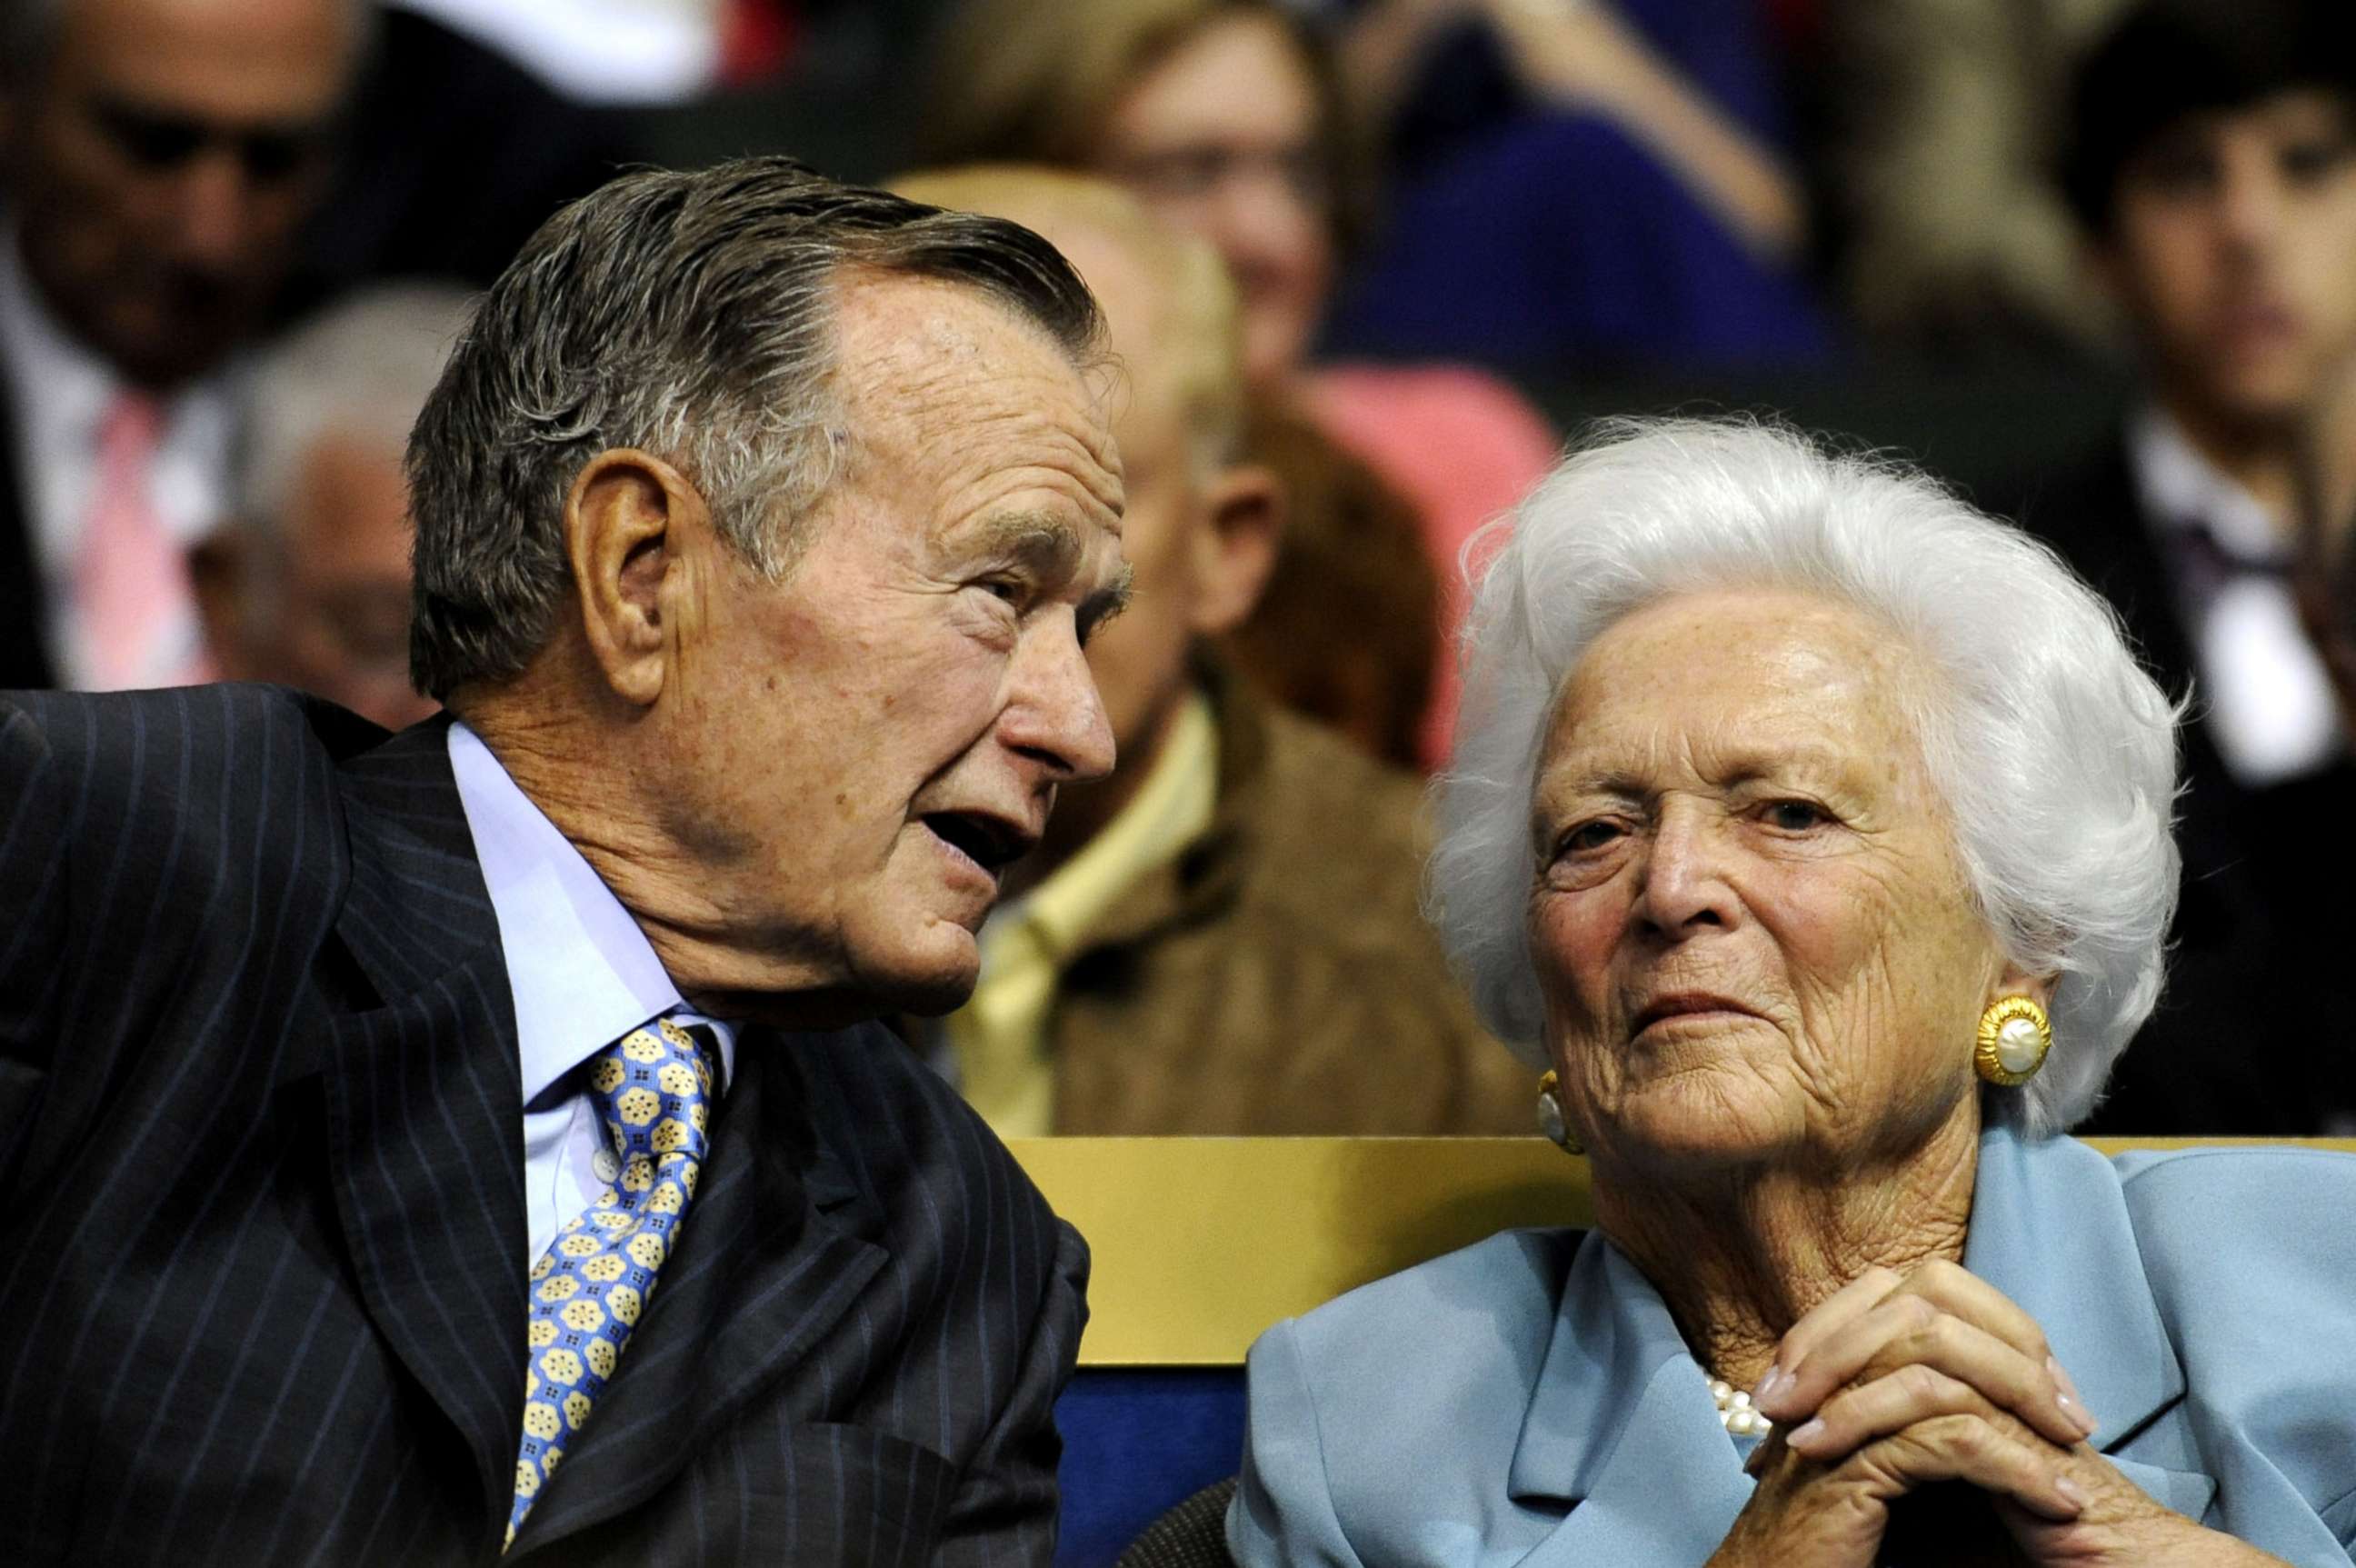 PHOTO: In this Sept. 2, 2008 file photo, former U.S. President George H.W. Bush, left, and former first lady Barbara Bush are seen at the Republican National Convention in St. Paul, Minn.